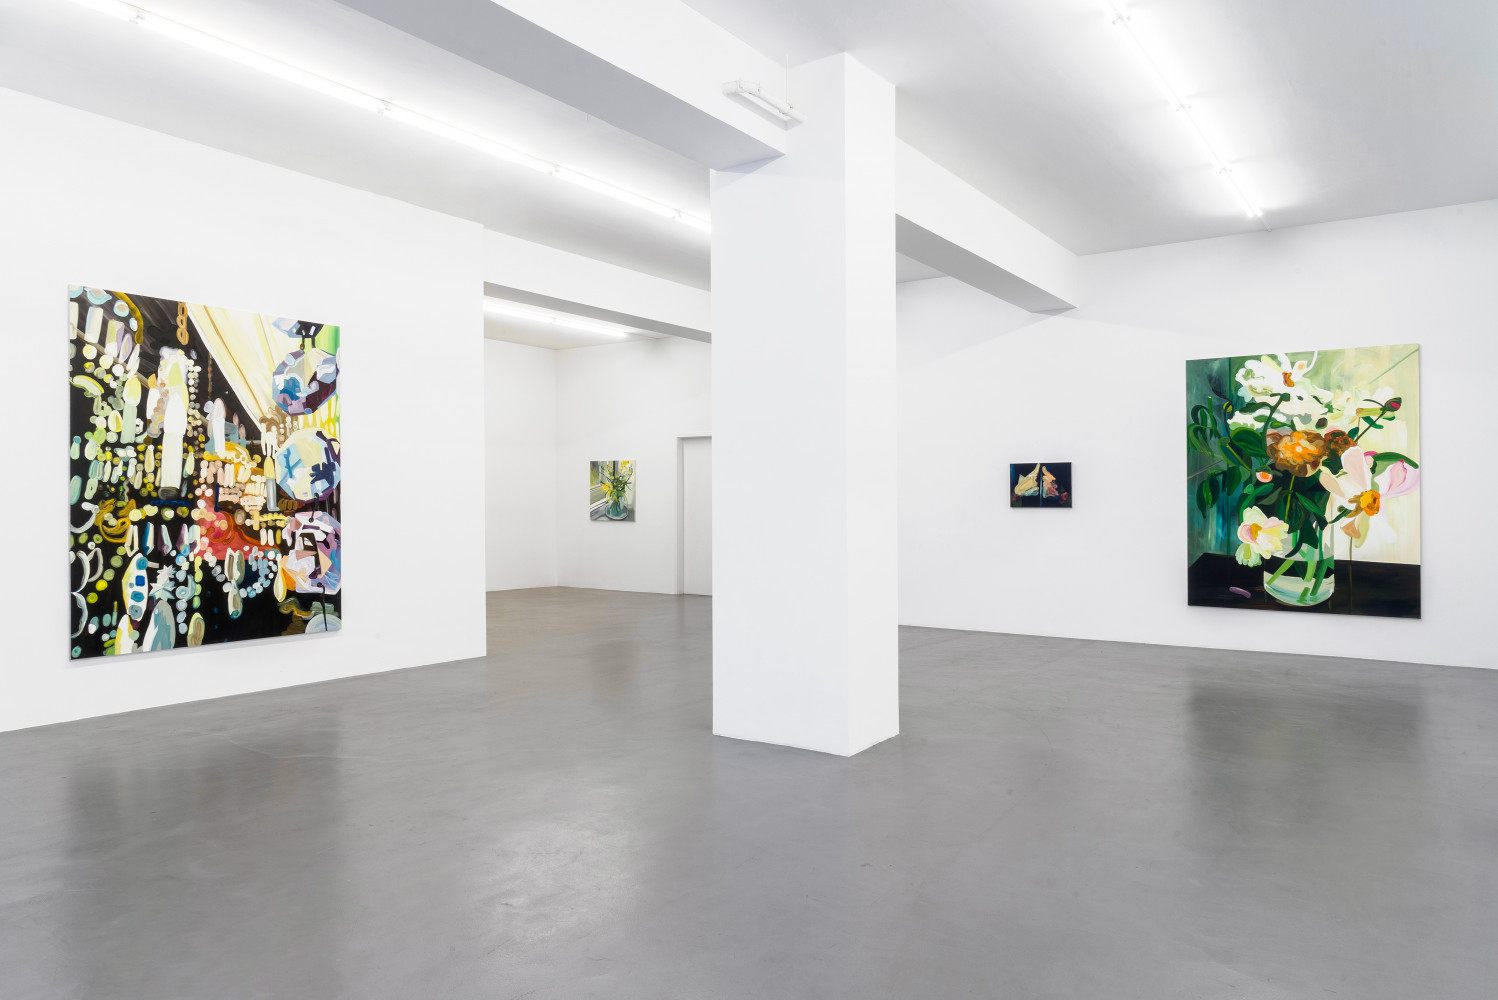 Clare Woods, ‘If Not Now Then When’, Installation view, Buchmann Galerie, 2020